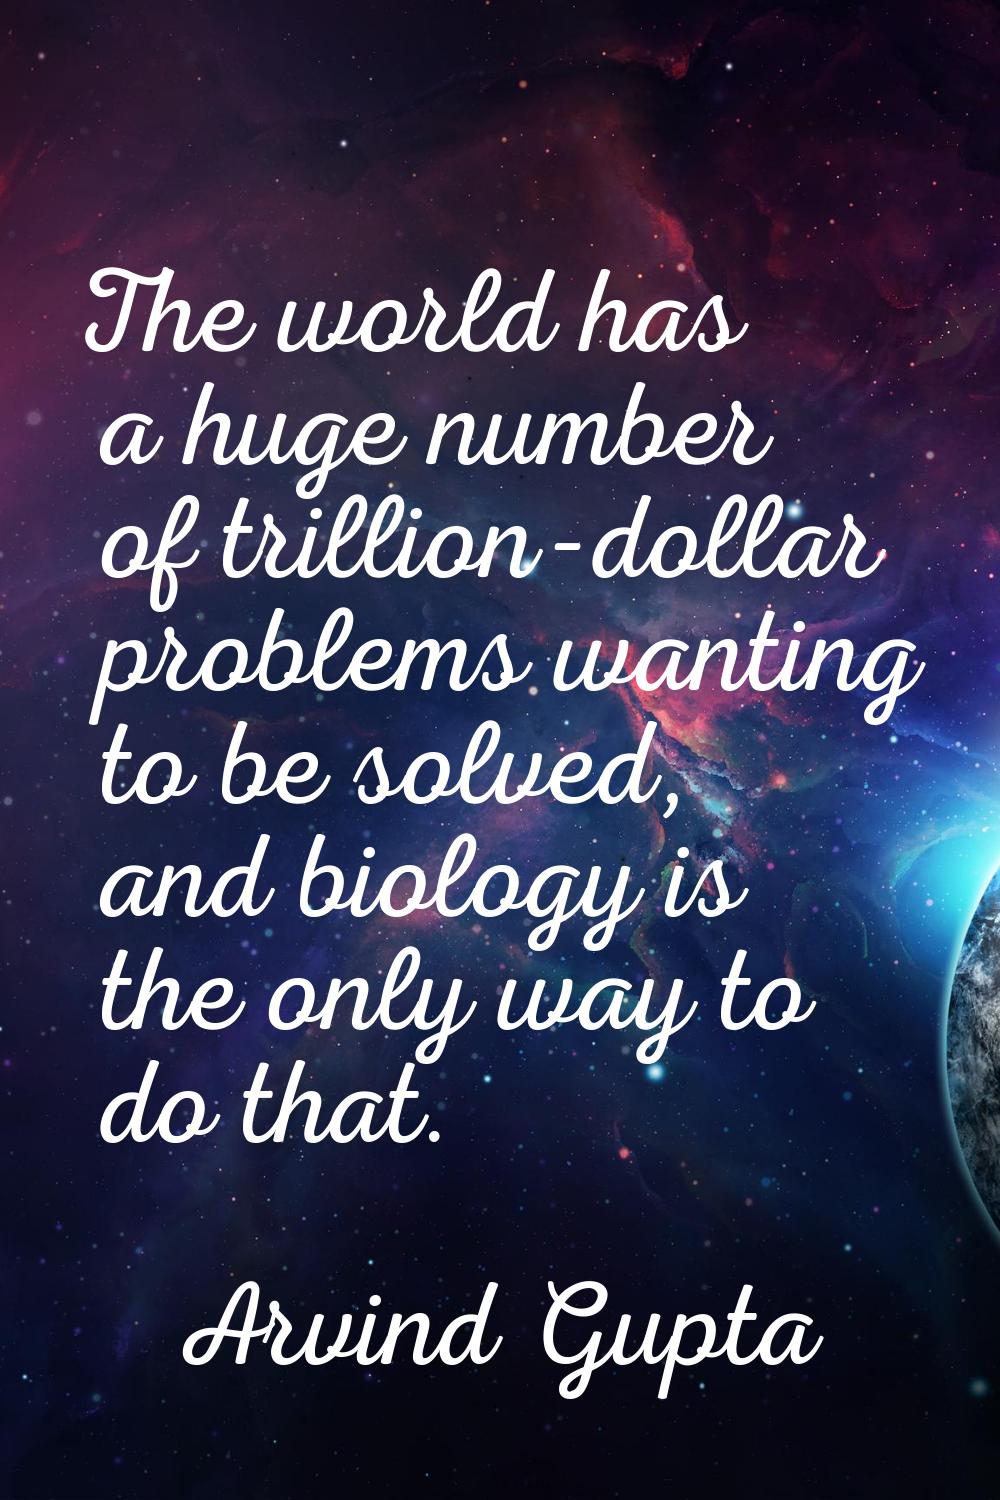 The world has a huge number of trillion-dollar problems wanting to be solved, and biology is the on